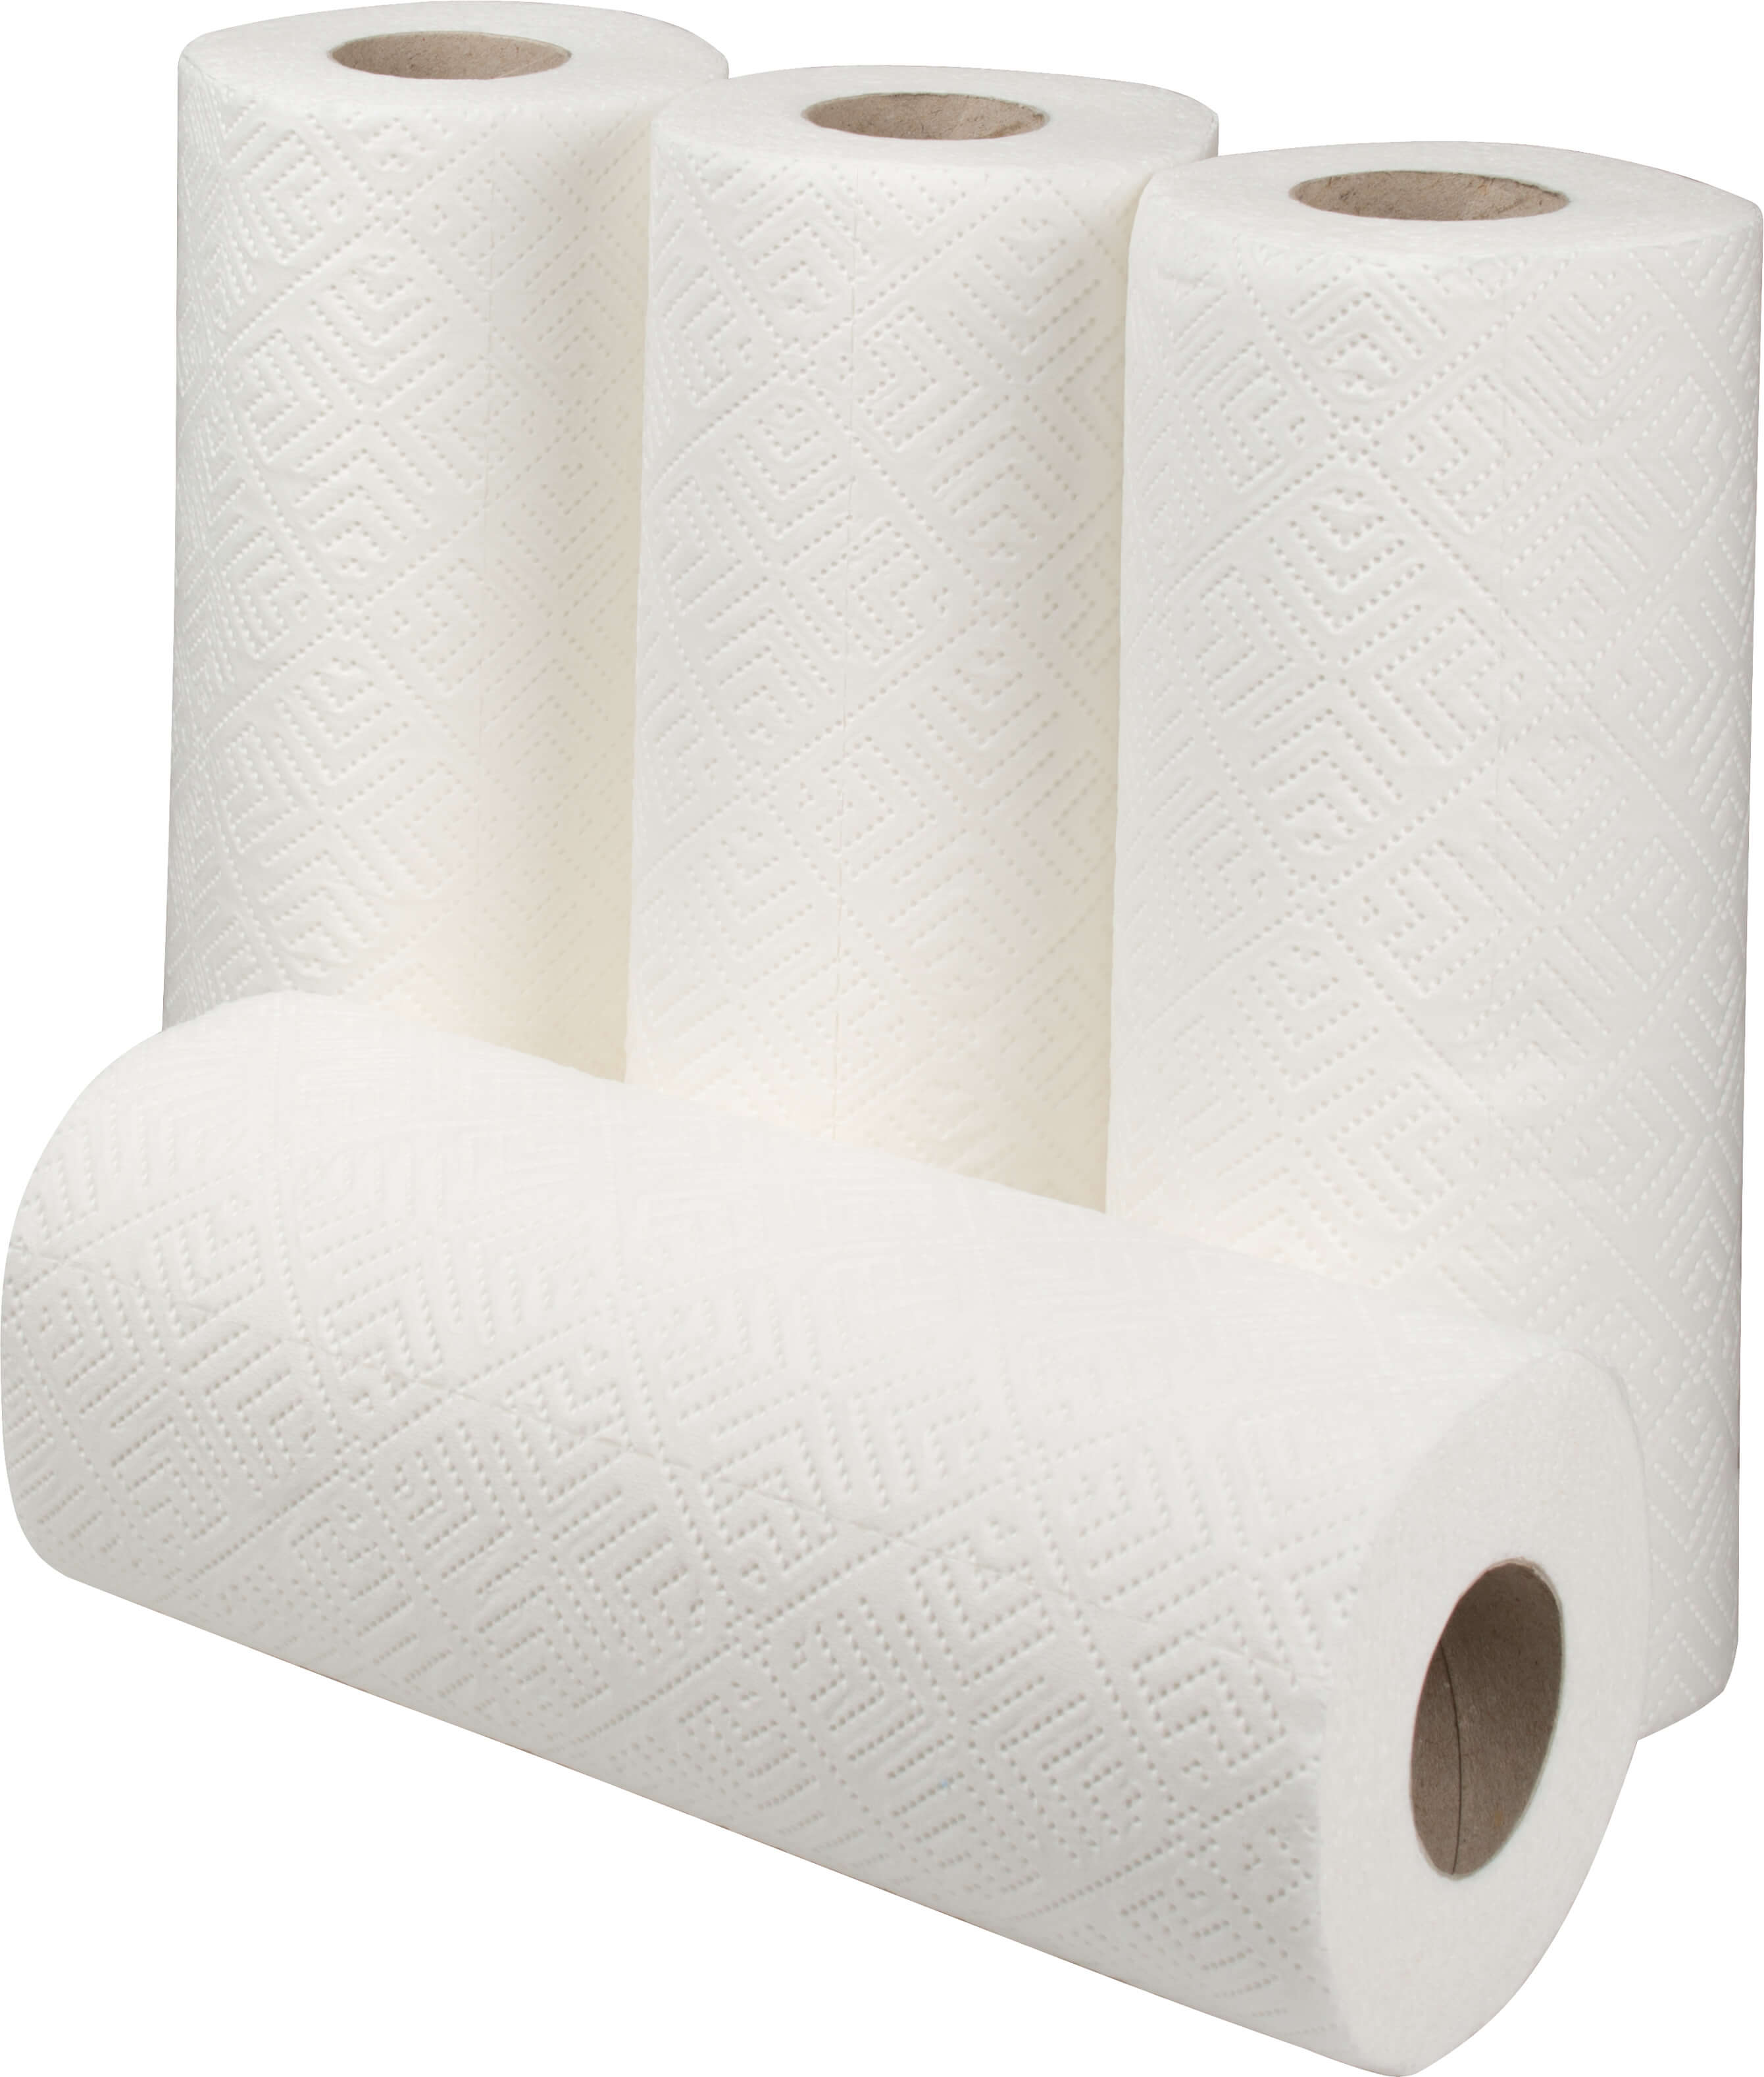 Kitchen Roll 3-ply, 50 sheets - 32 rolls